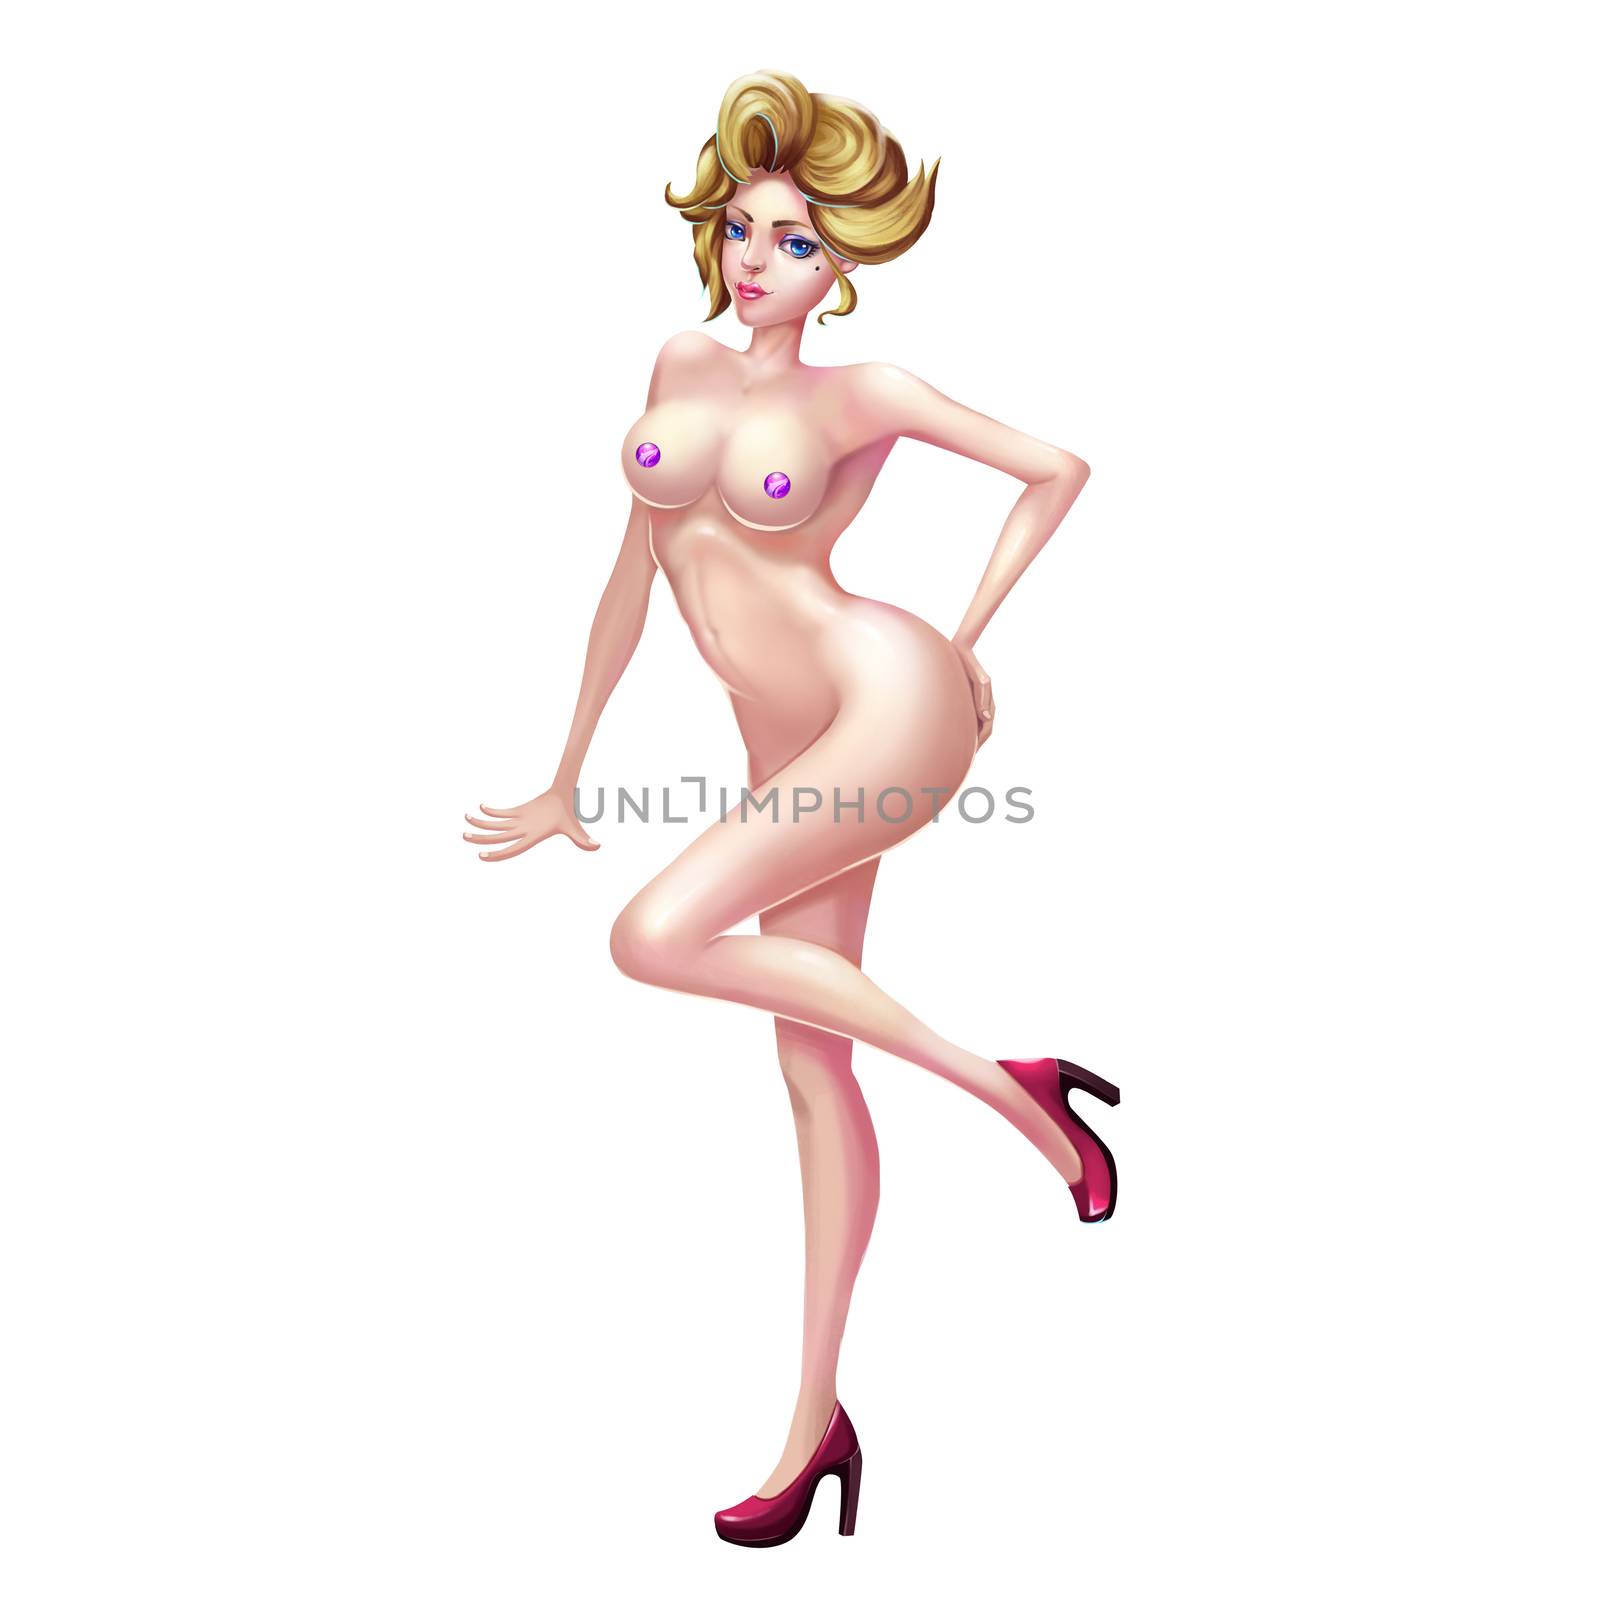 High Definition Illustration: Seductive Women Set with Fewer and Fewer Clothes. Realistic Cartoon Style Character Design.